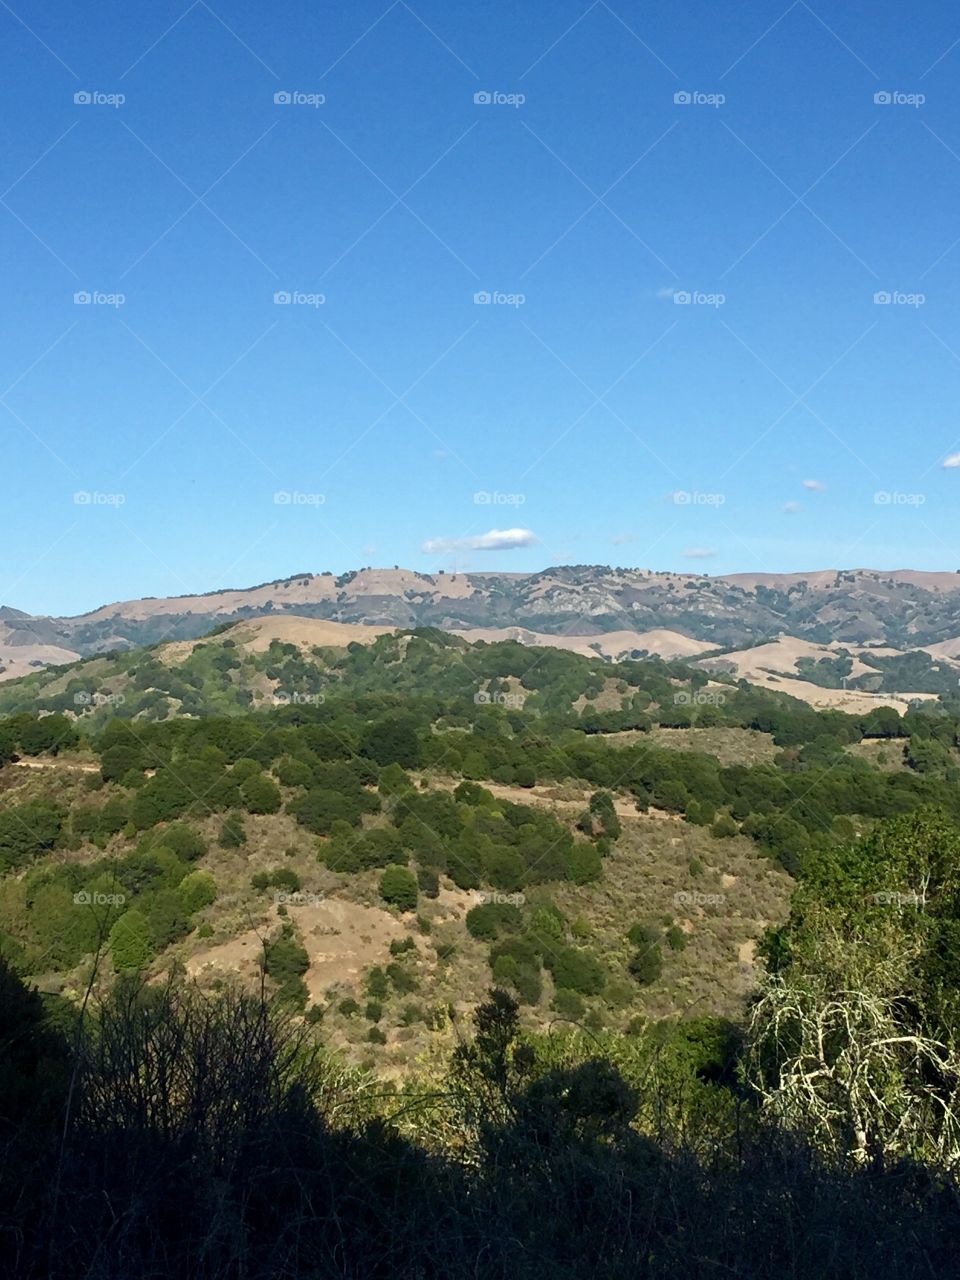 Beautiful view of  California hills, even in the drought.  This is from the top of a hill in Redwood Regional Park in Oakland.